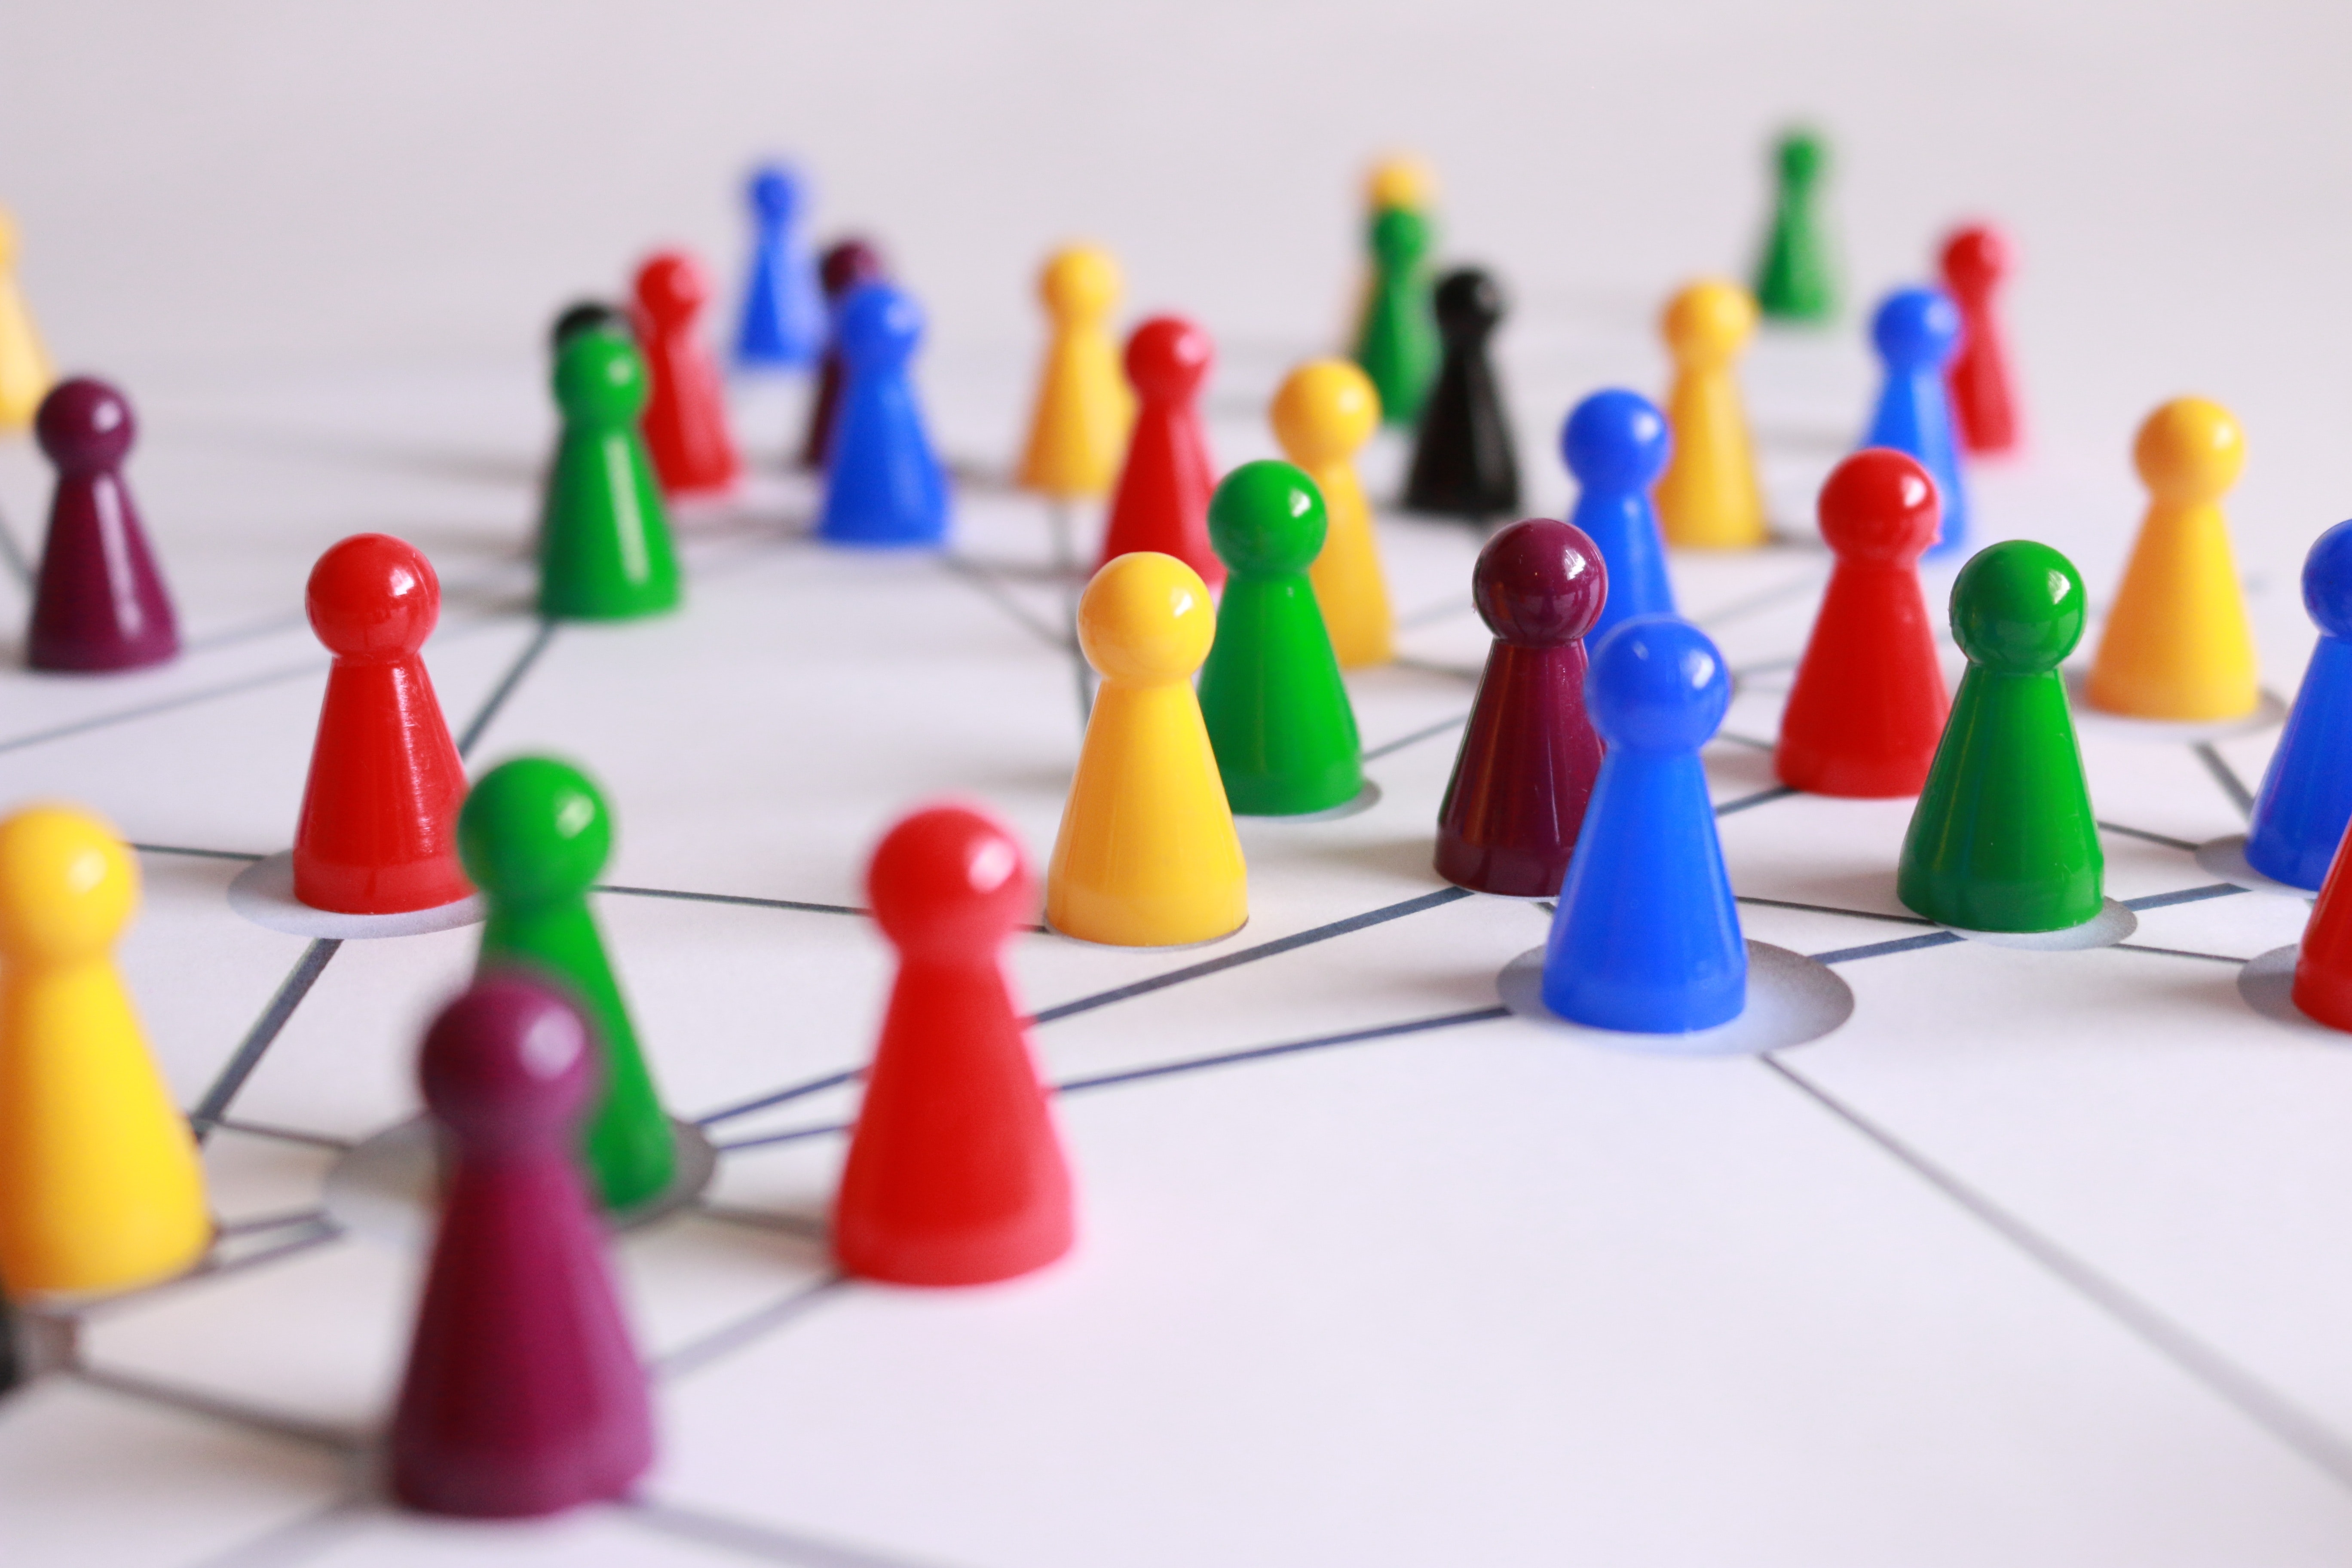 Recruiters access their diverse network of candidates